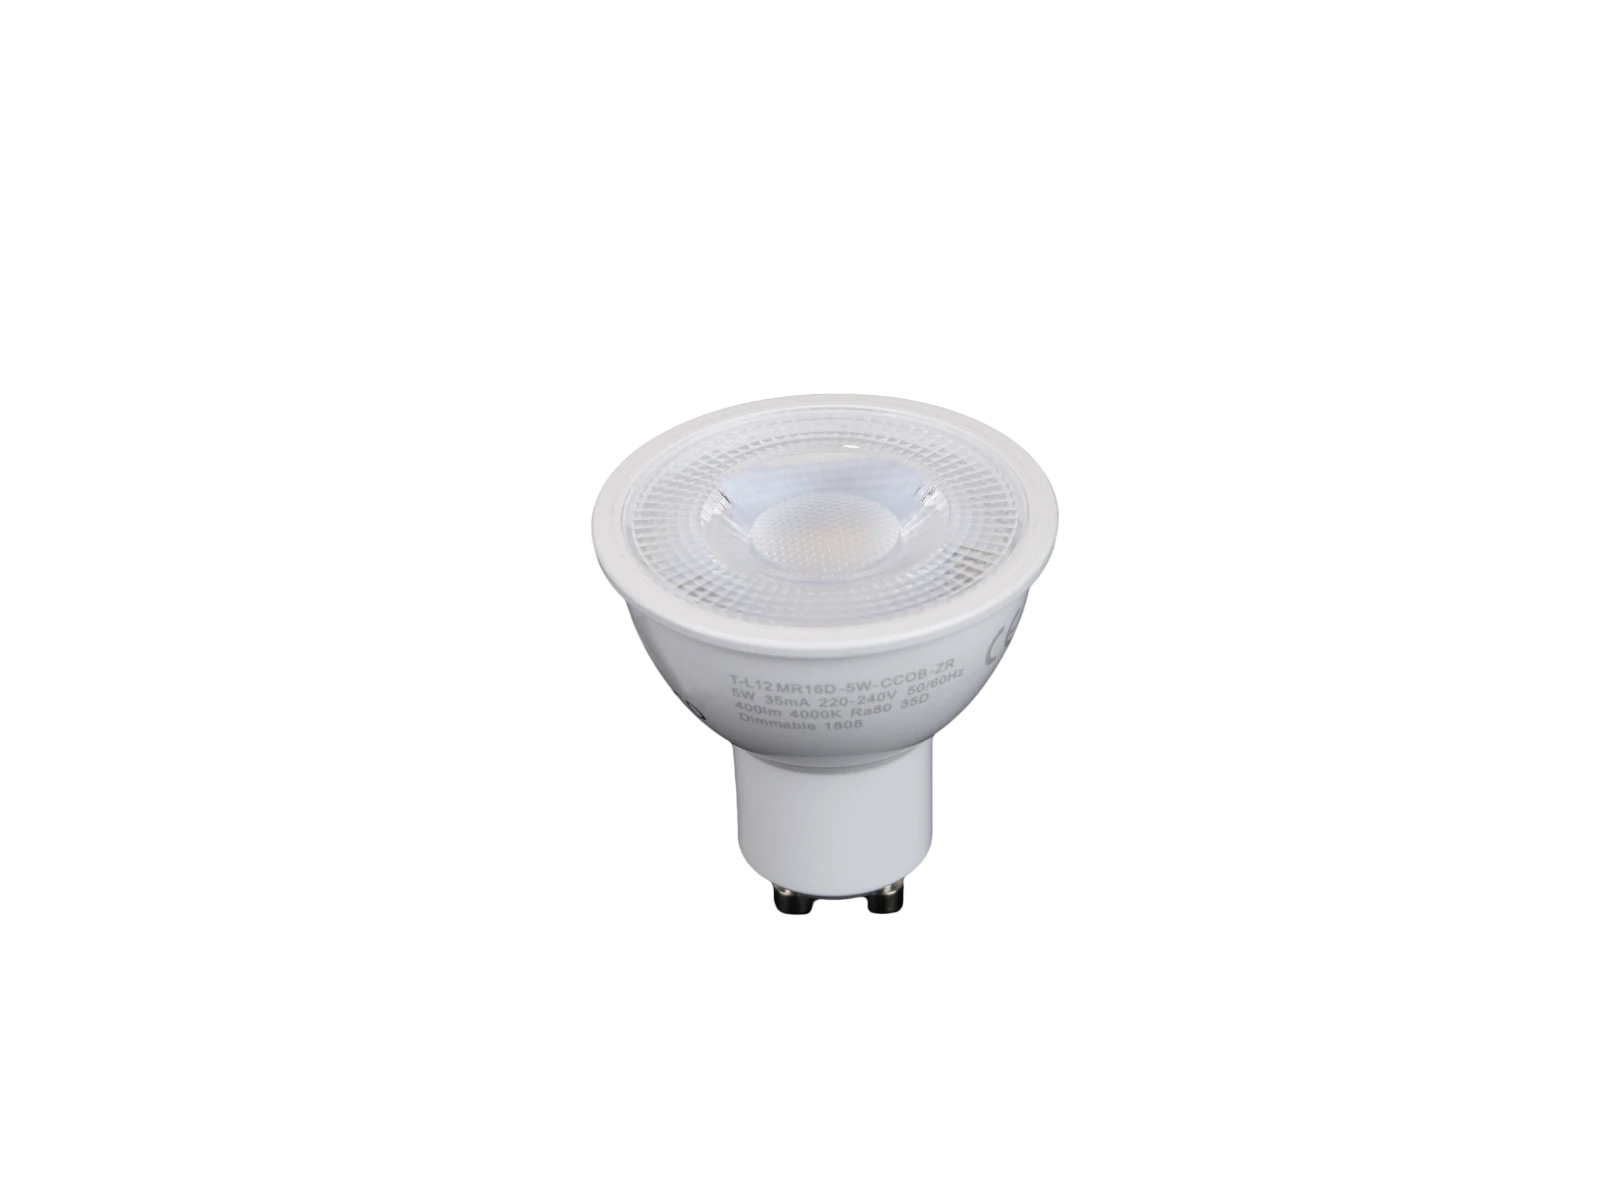 Robus Long Neck GU10 LED Bulb Lamp 5w 4000k cool white 71x50mm CFL replacement 